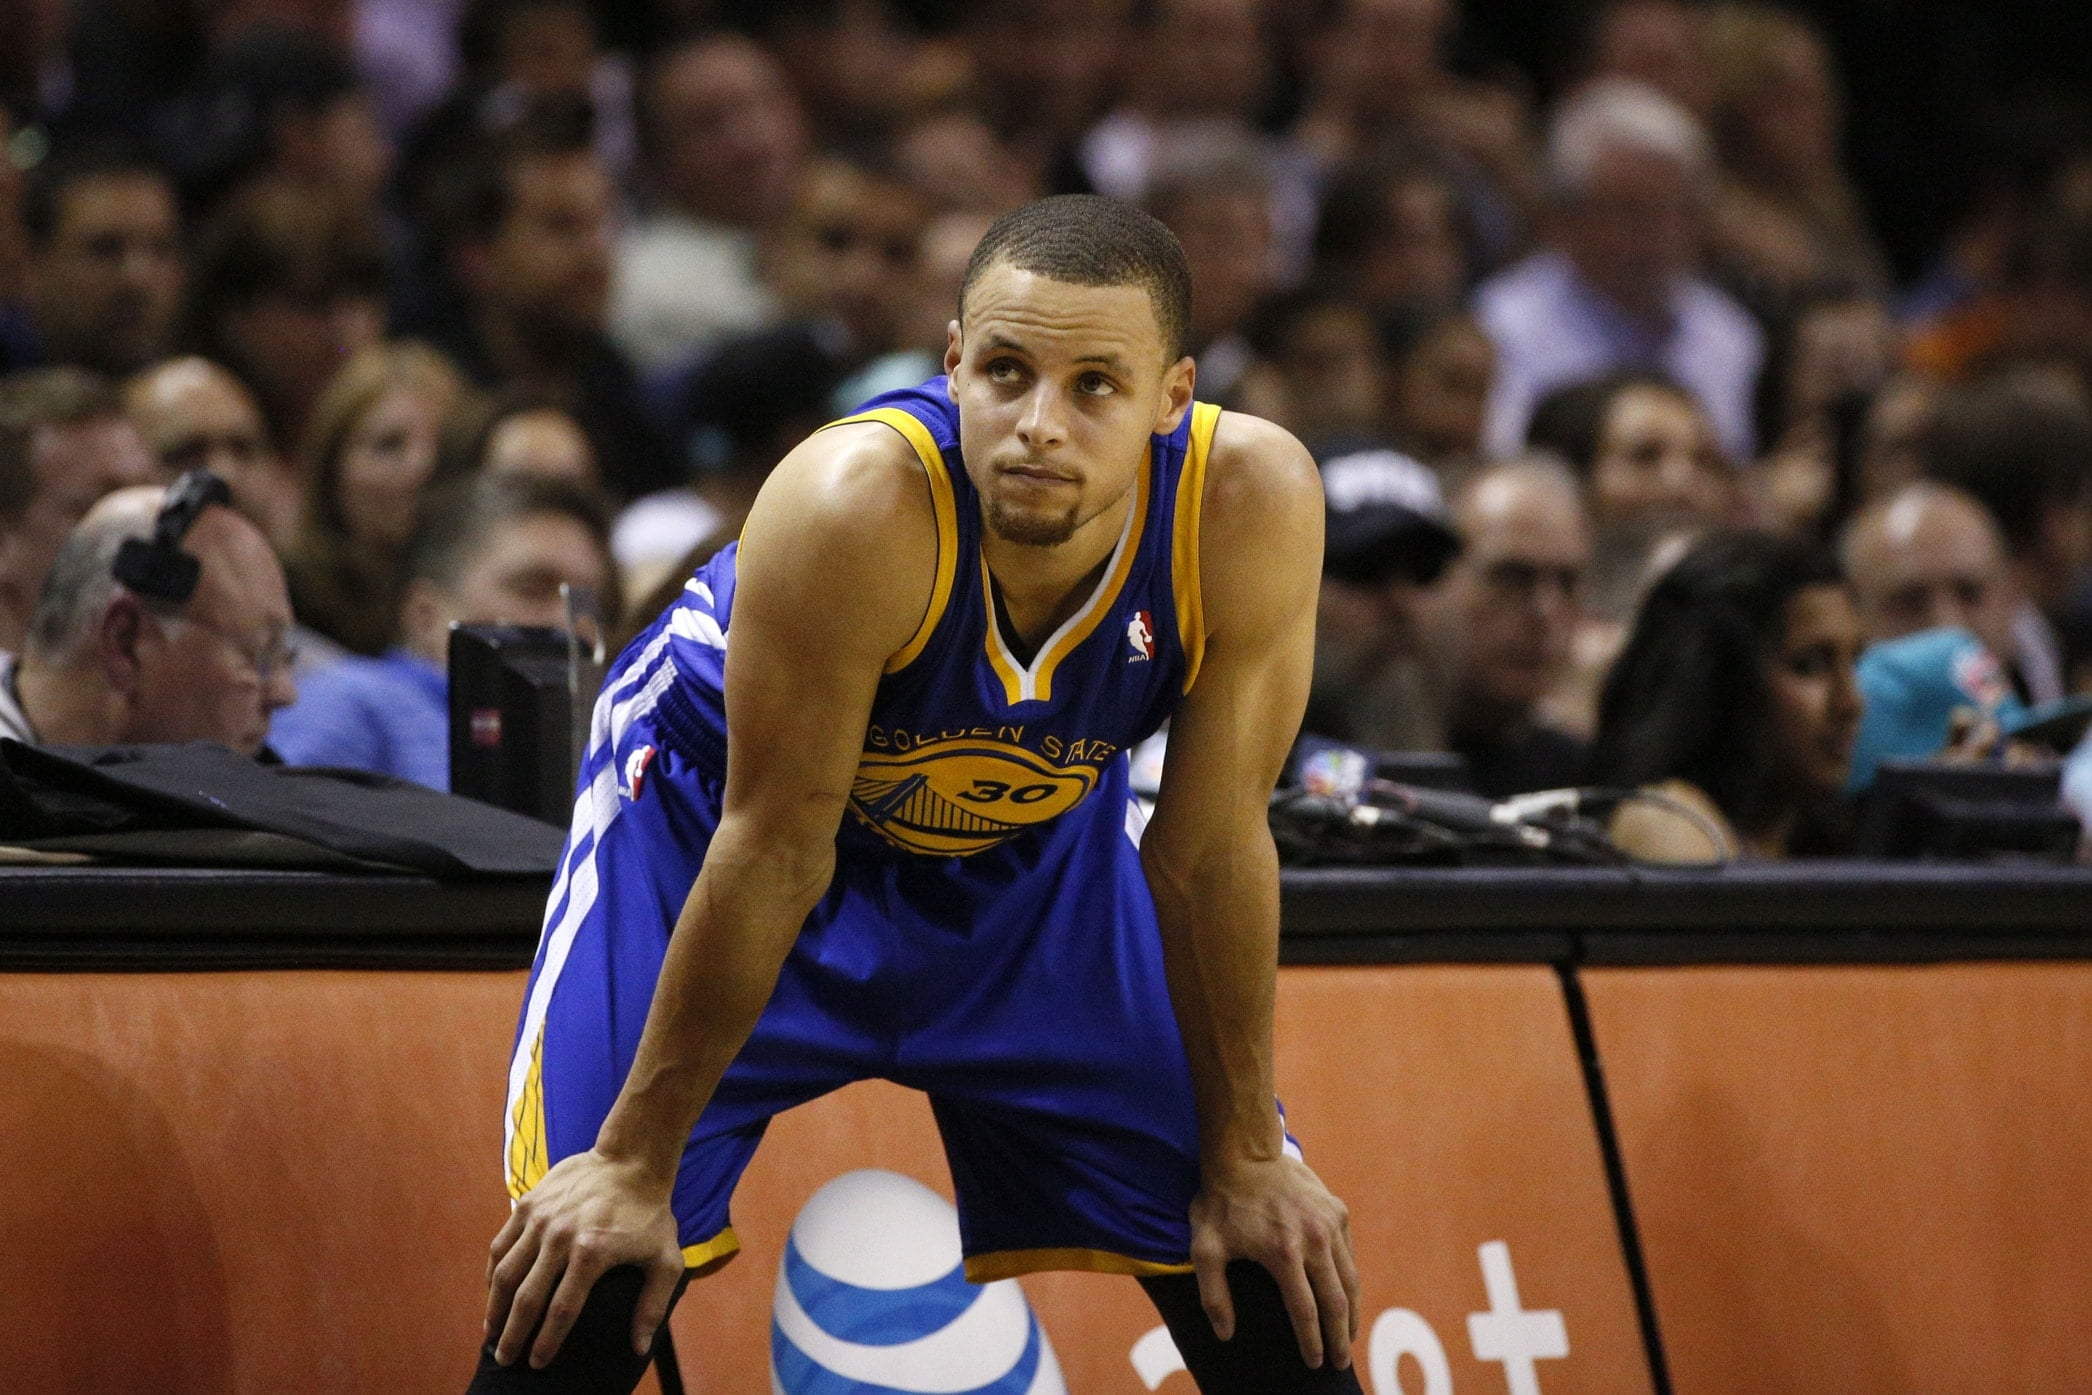 Can Stephen Curry make the All-NBA Team? Photo via Soobum Im, USA Today Sports Images